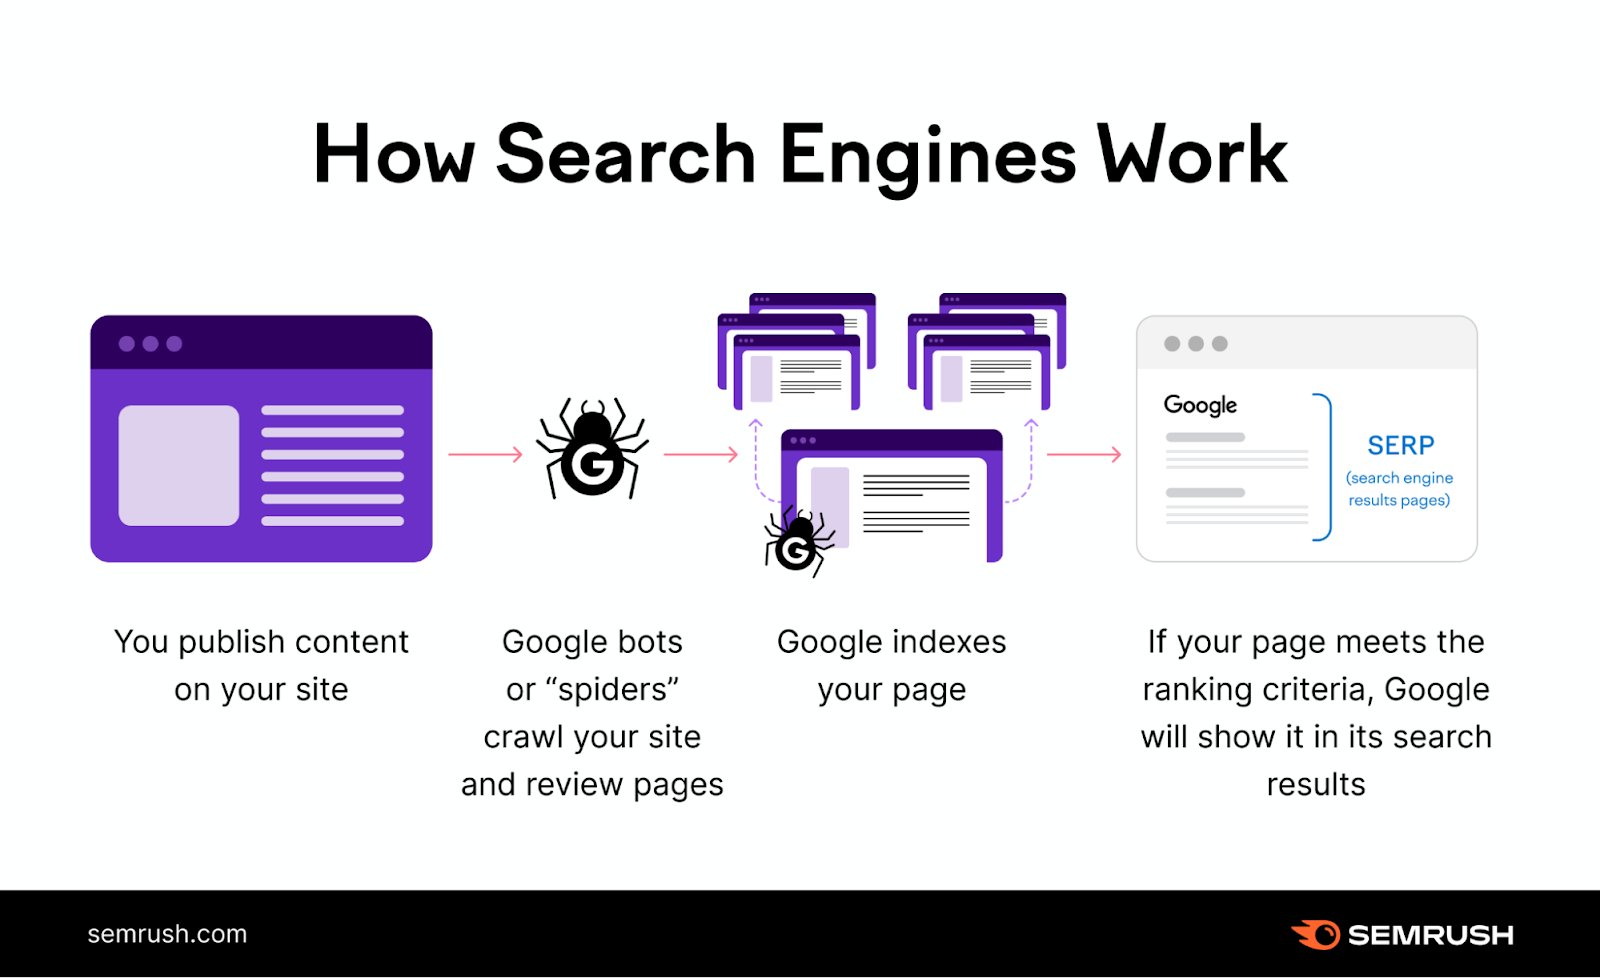 An illustration showing how search engines work